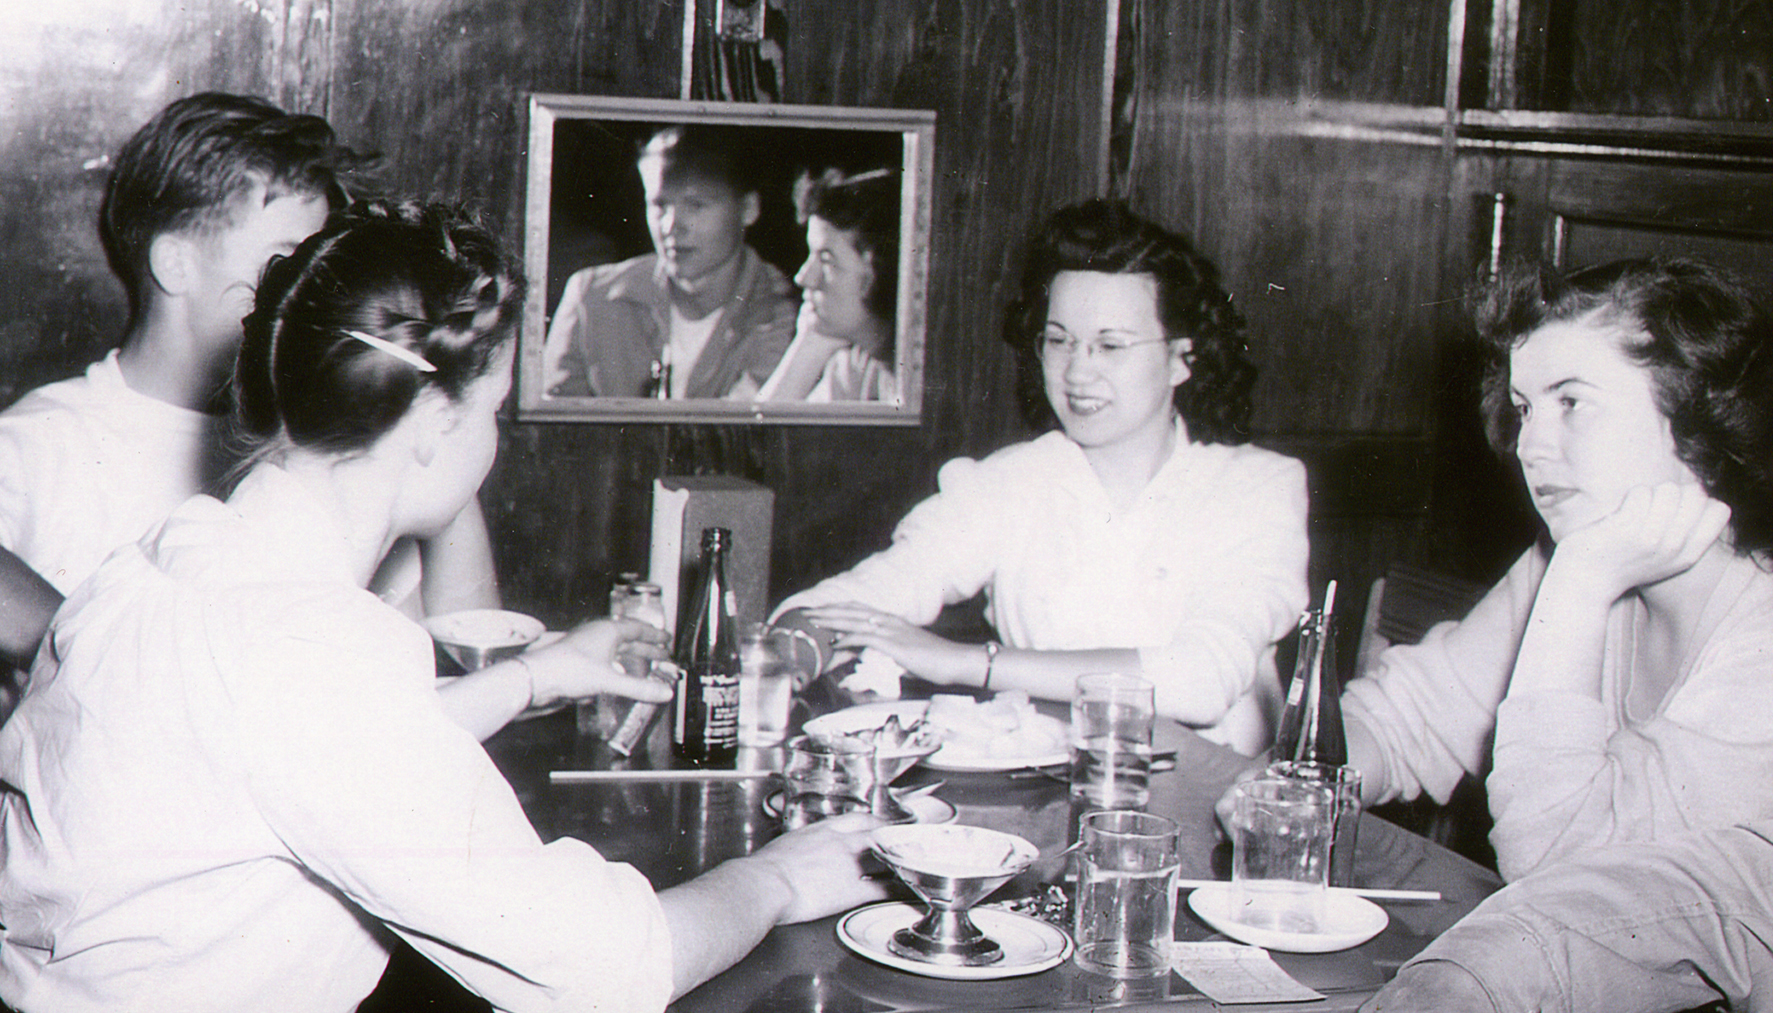 Teenagers in a Club Café booth, 1944